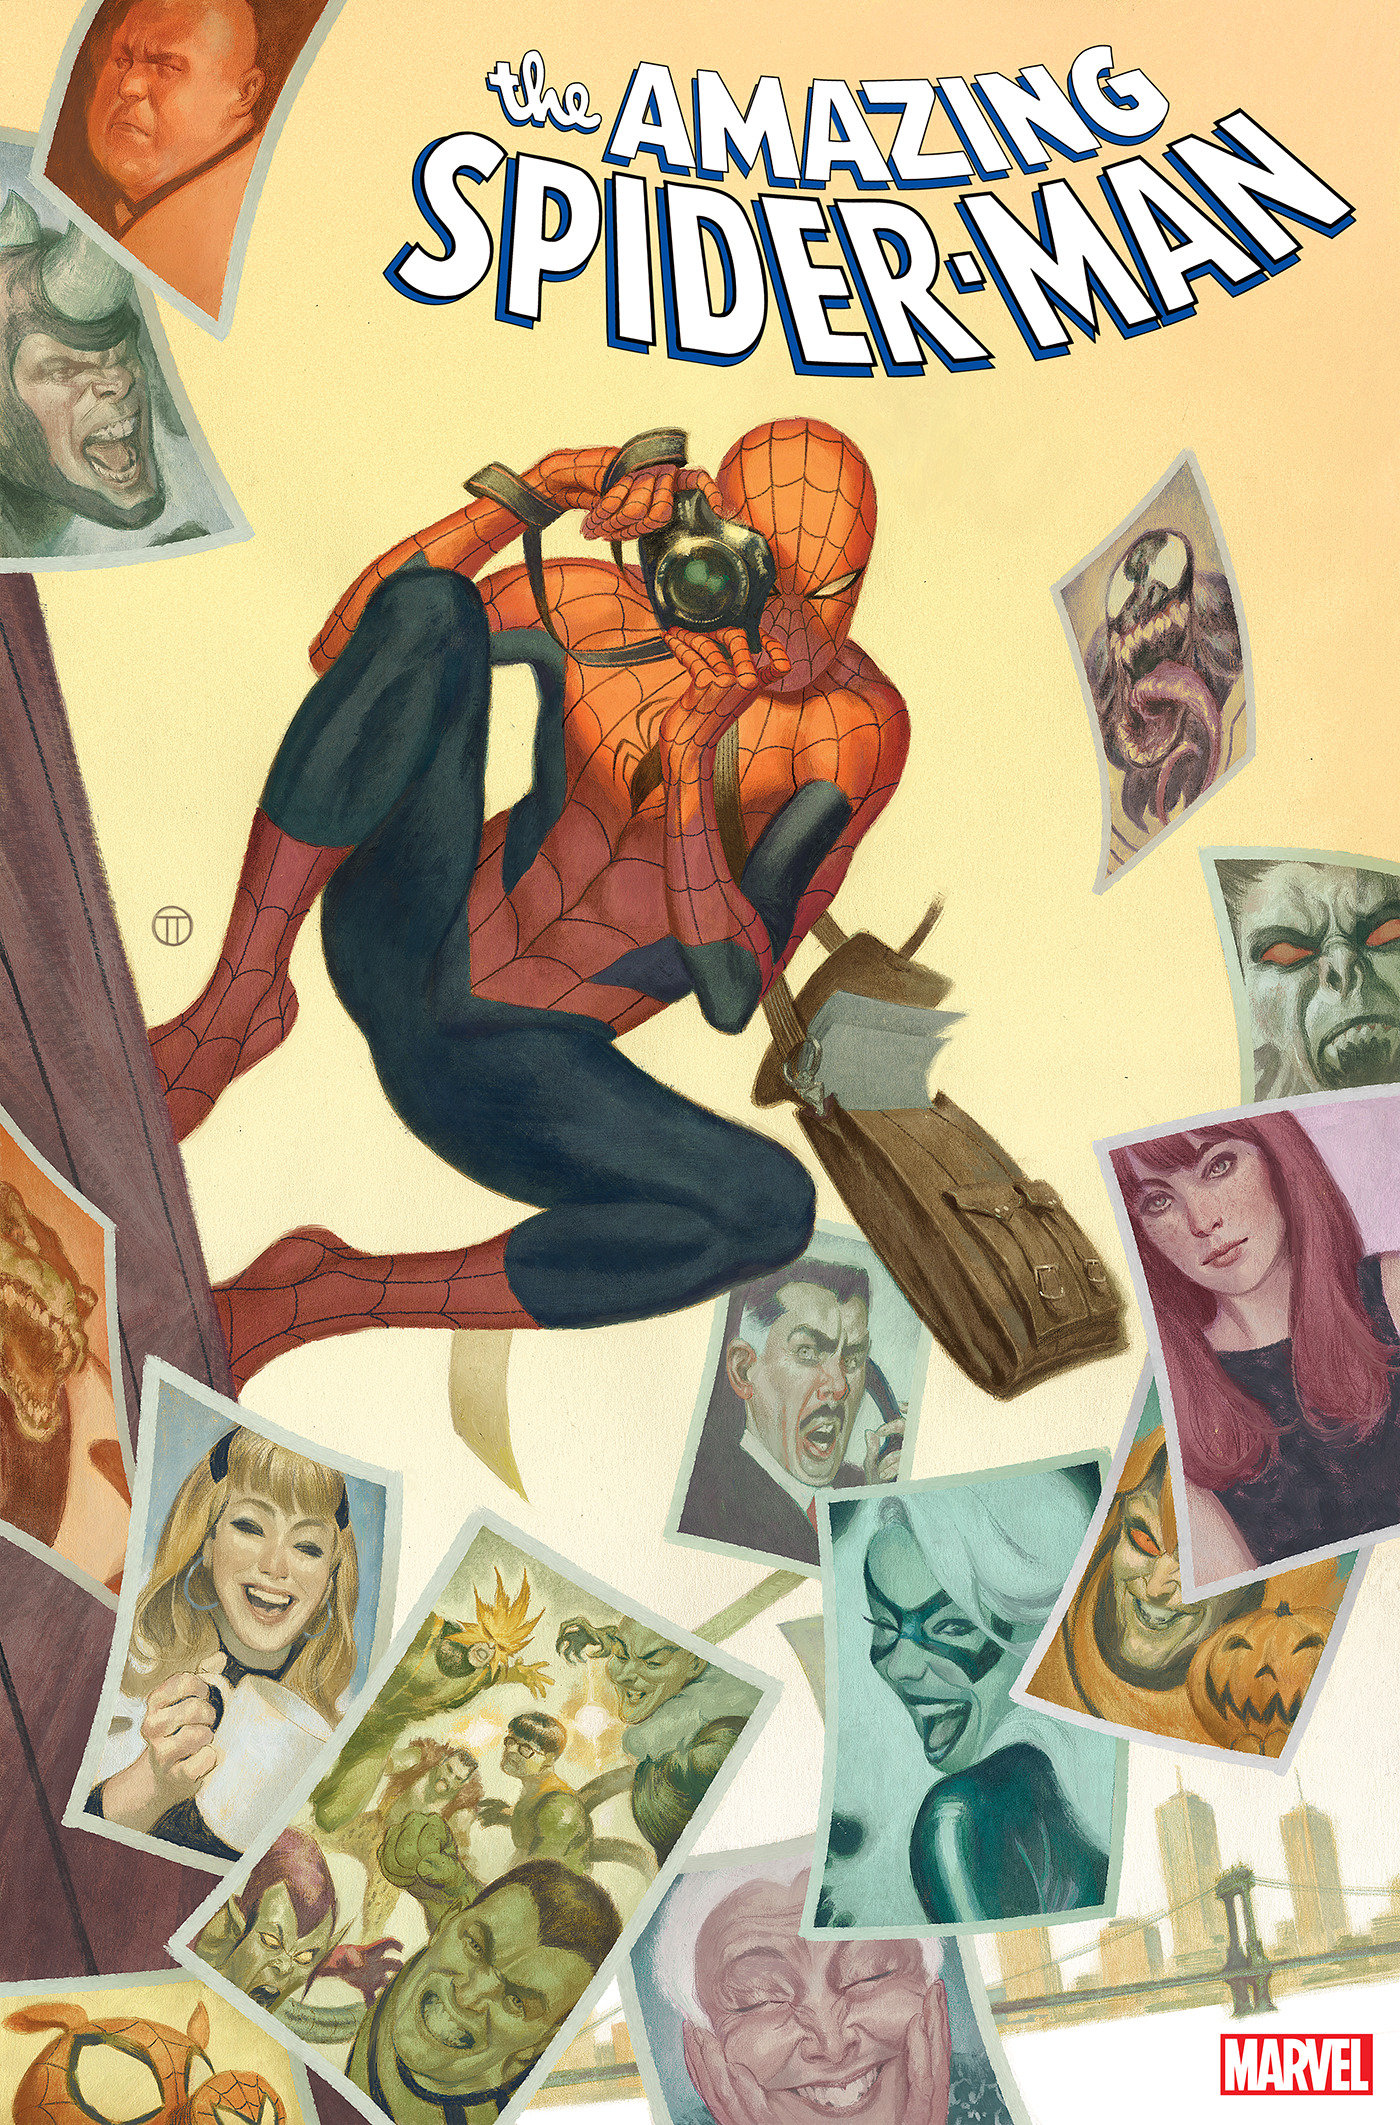 Amazing Spider-Man #6 1 for 25 Incentive Tedesco Variant (2022)